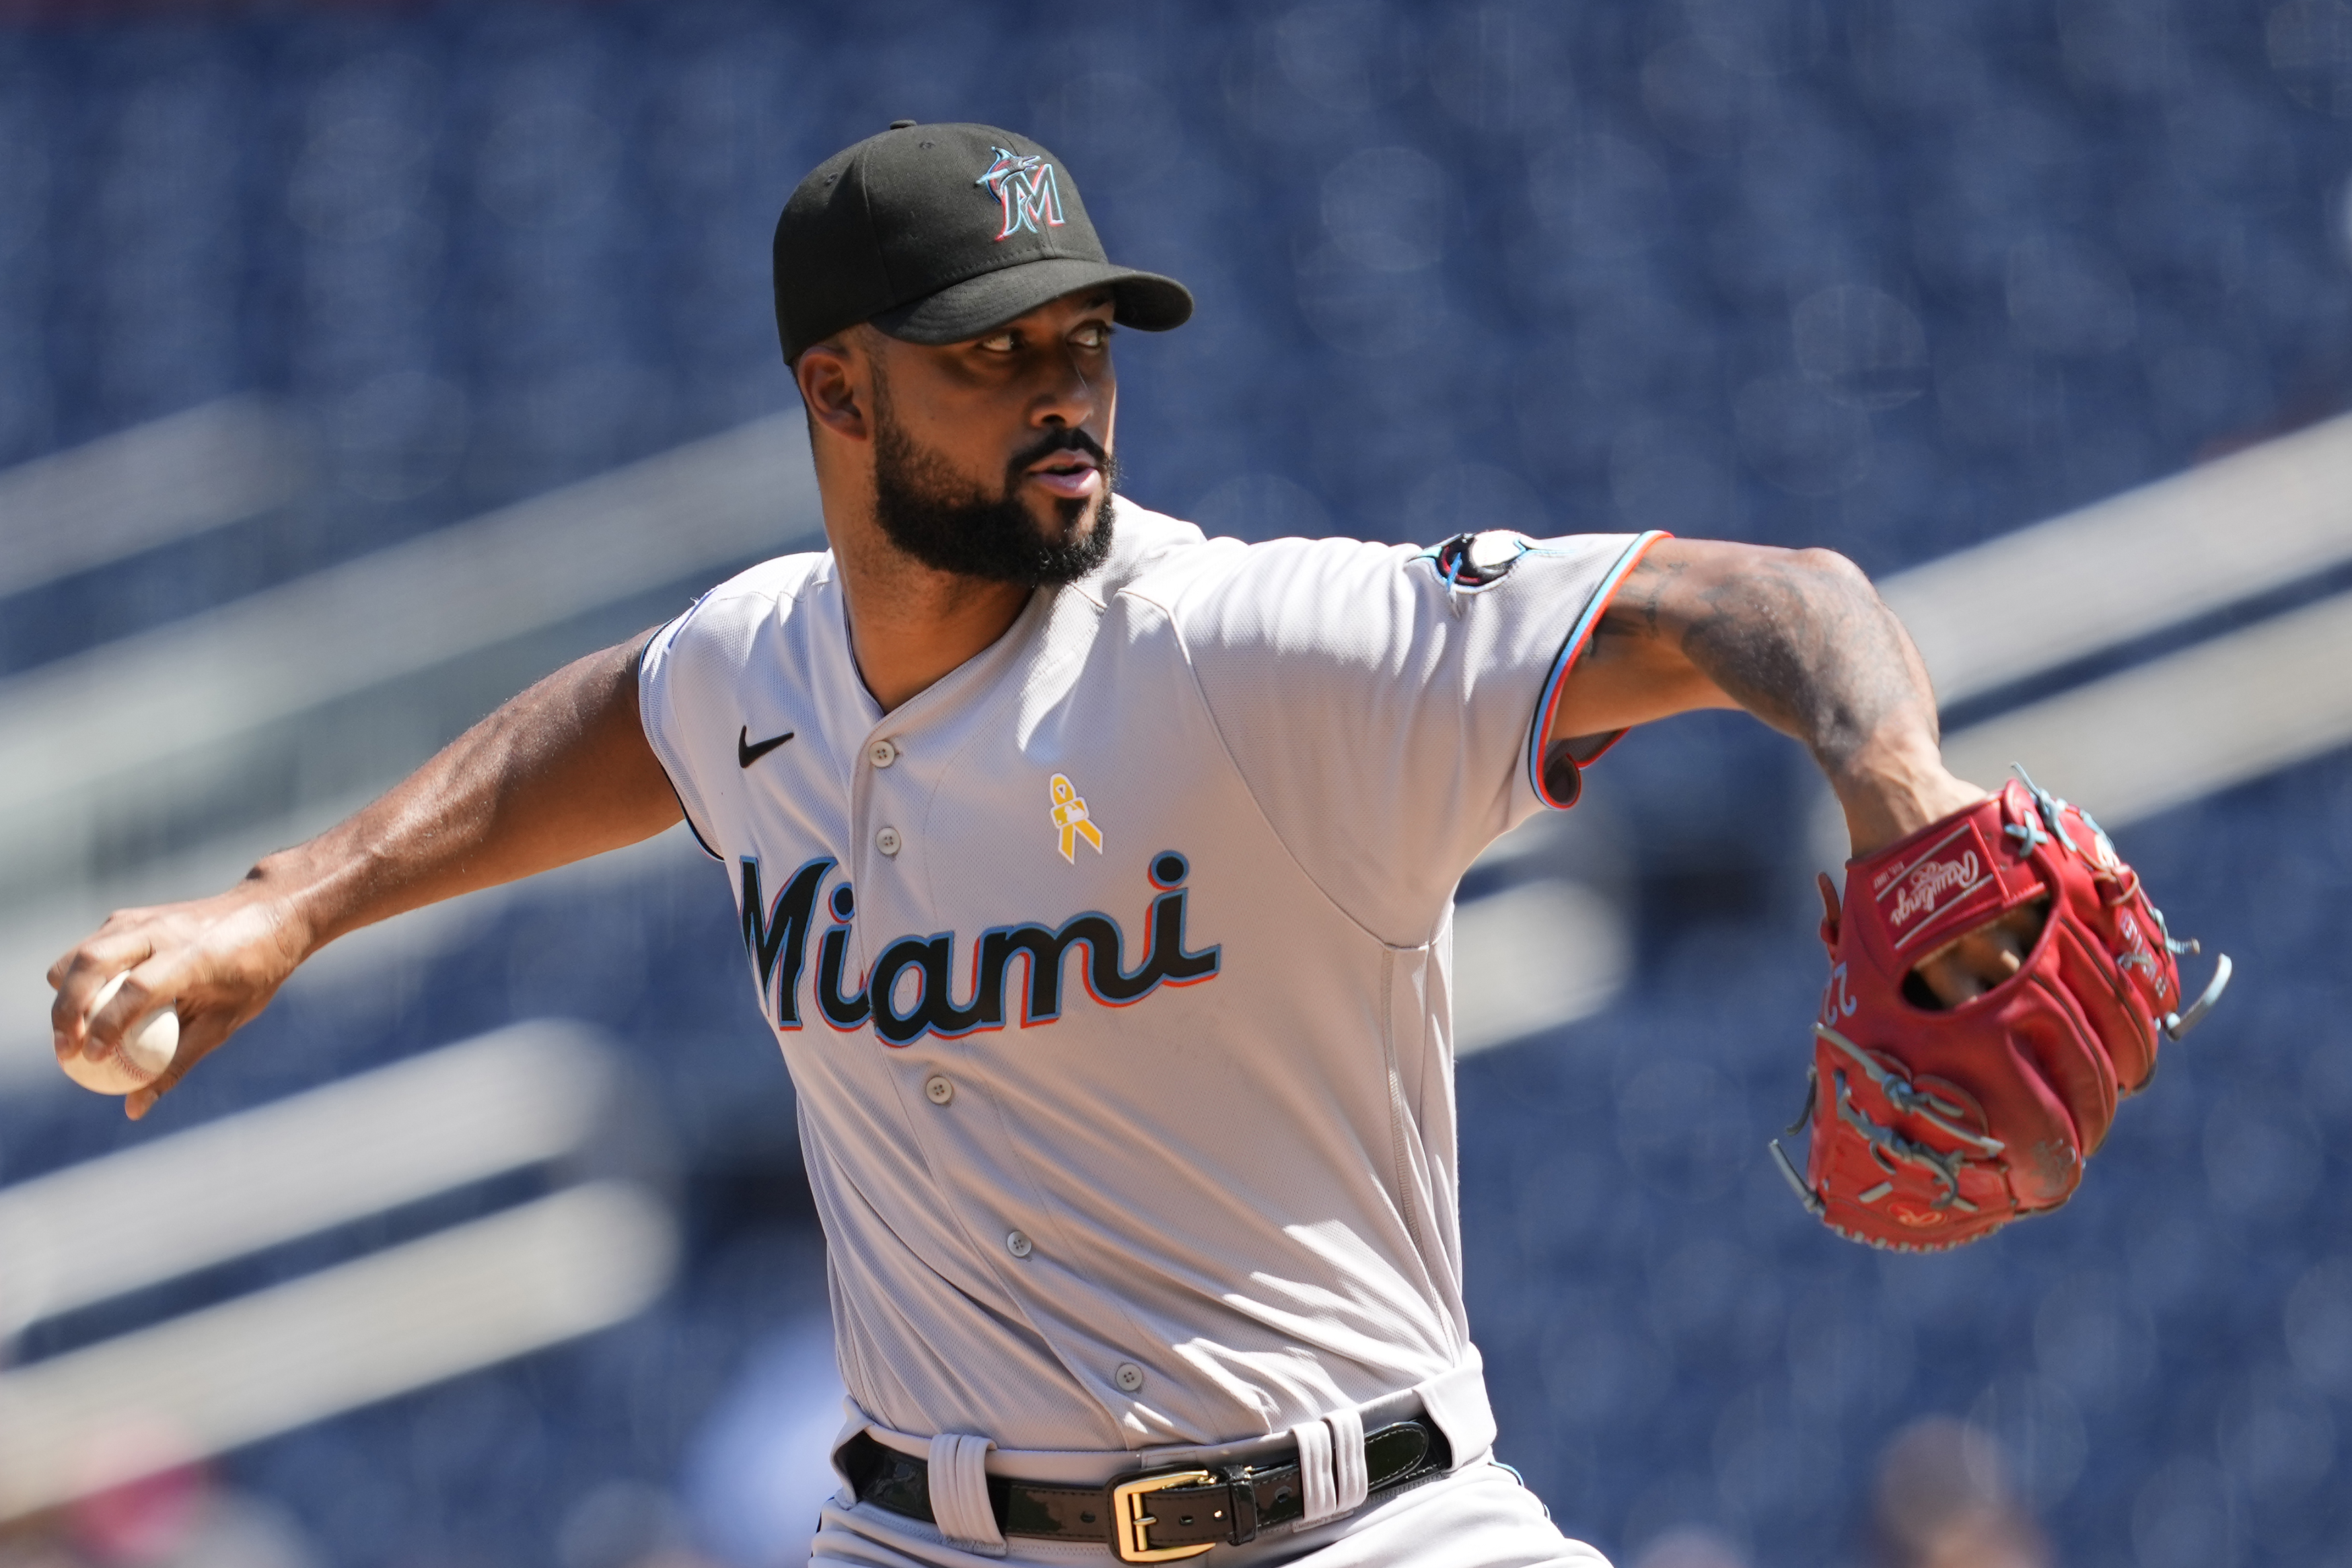 The top 5 Starting Pitcher seasons in Miami Marlins history